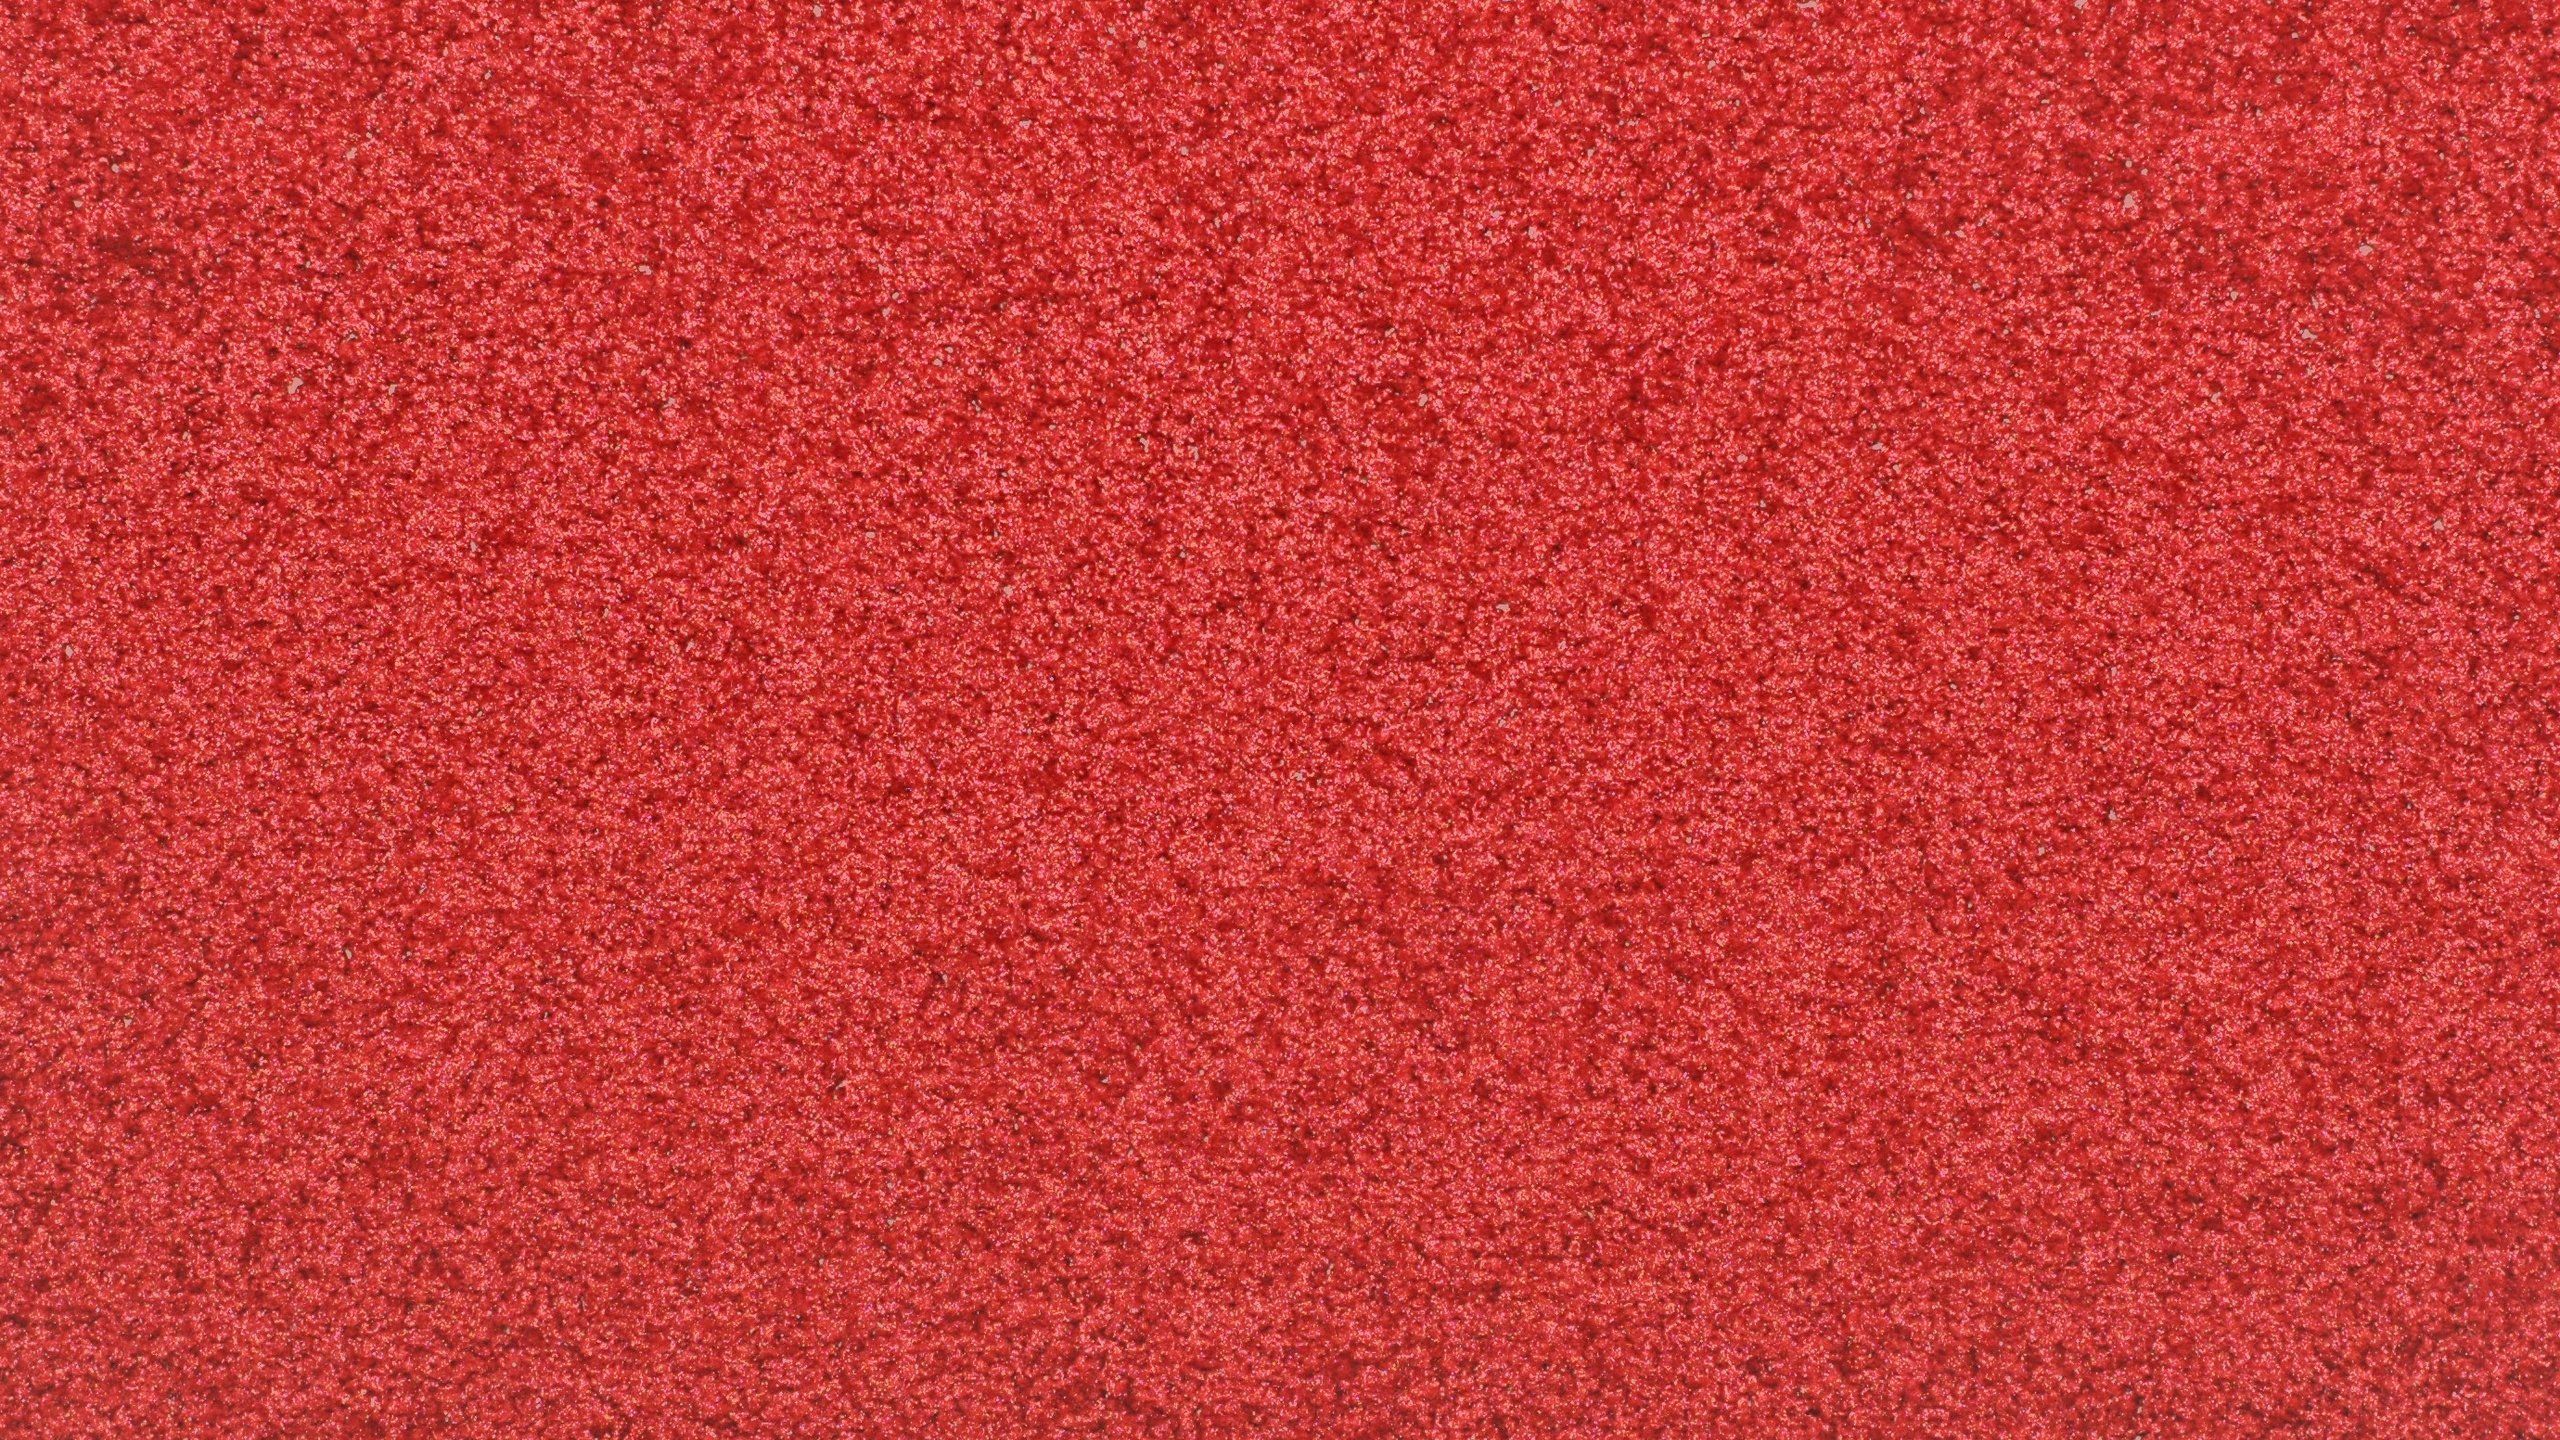 Background Red Carpet Texture Picture Image